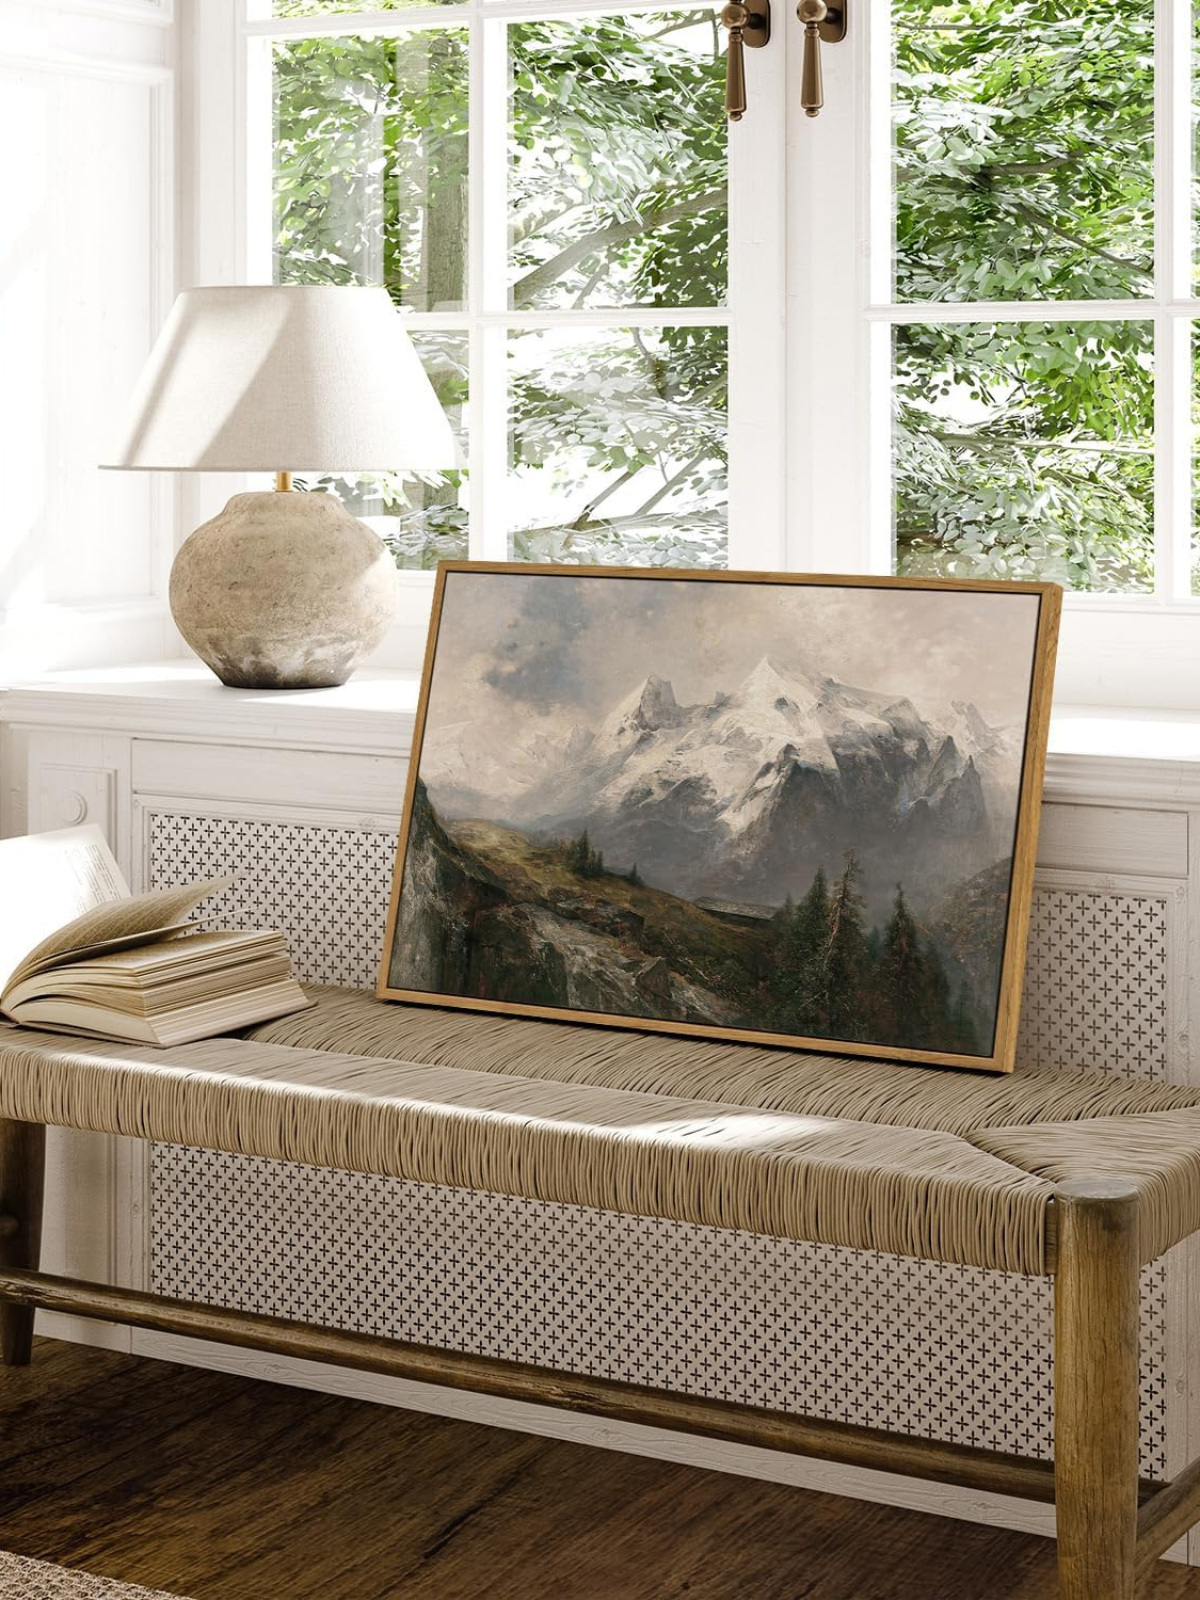 Nature Large Framed Wall Art, The Alpine Pastures Vintage Art Decor Room Aesthetic, 16X24 Inch Canvas Print Art, Mountain Landscape Painting Wall Decor for Bedroom Bathroom Office